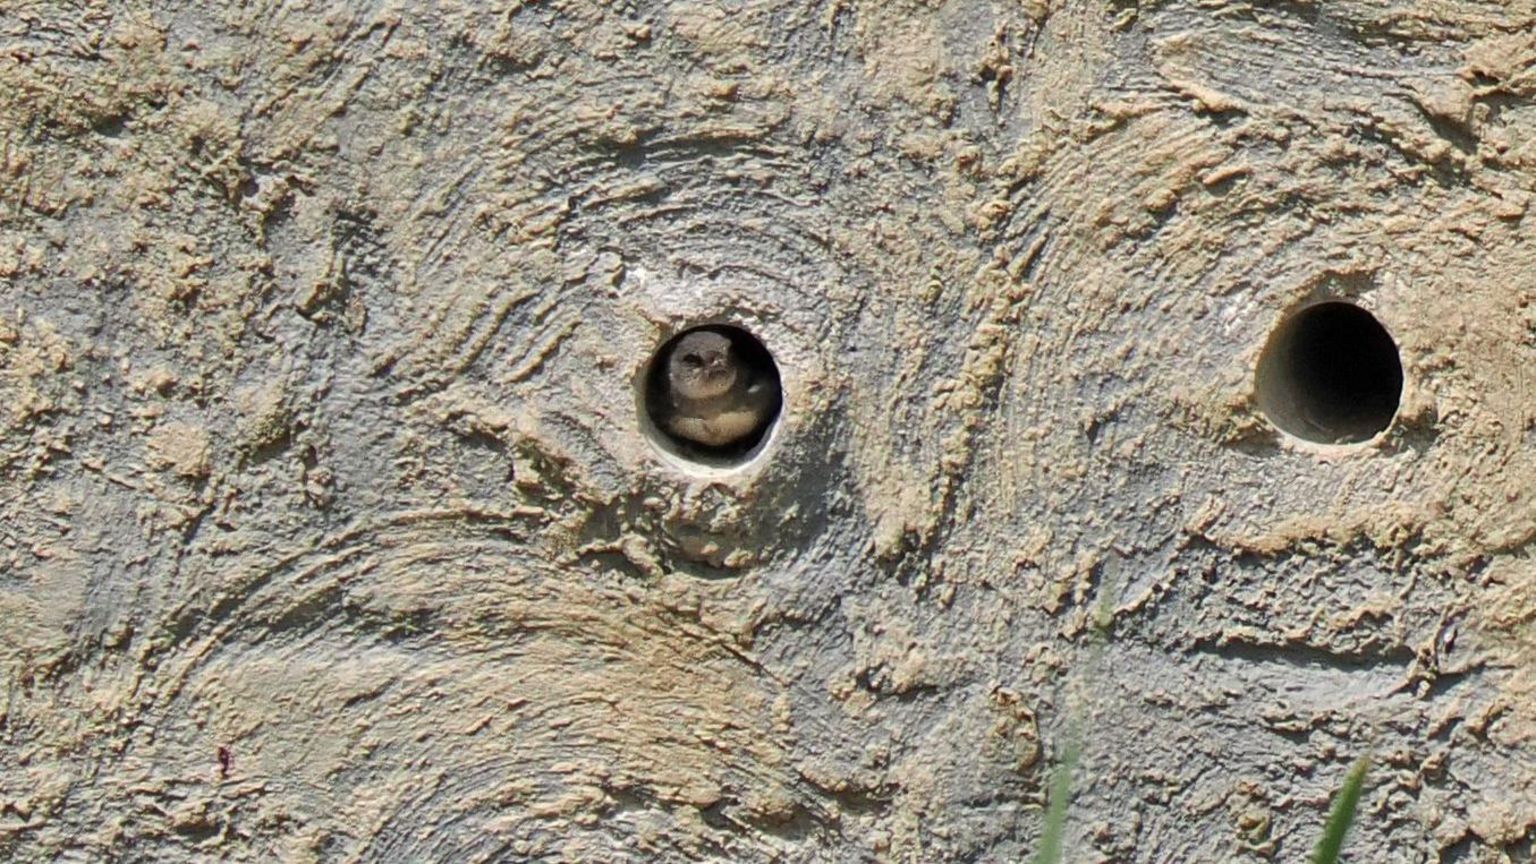 A sand martin chick peering out from a circular opening